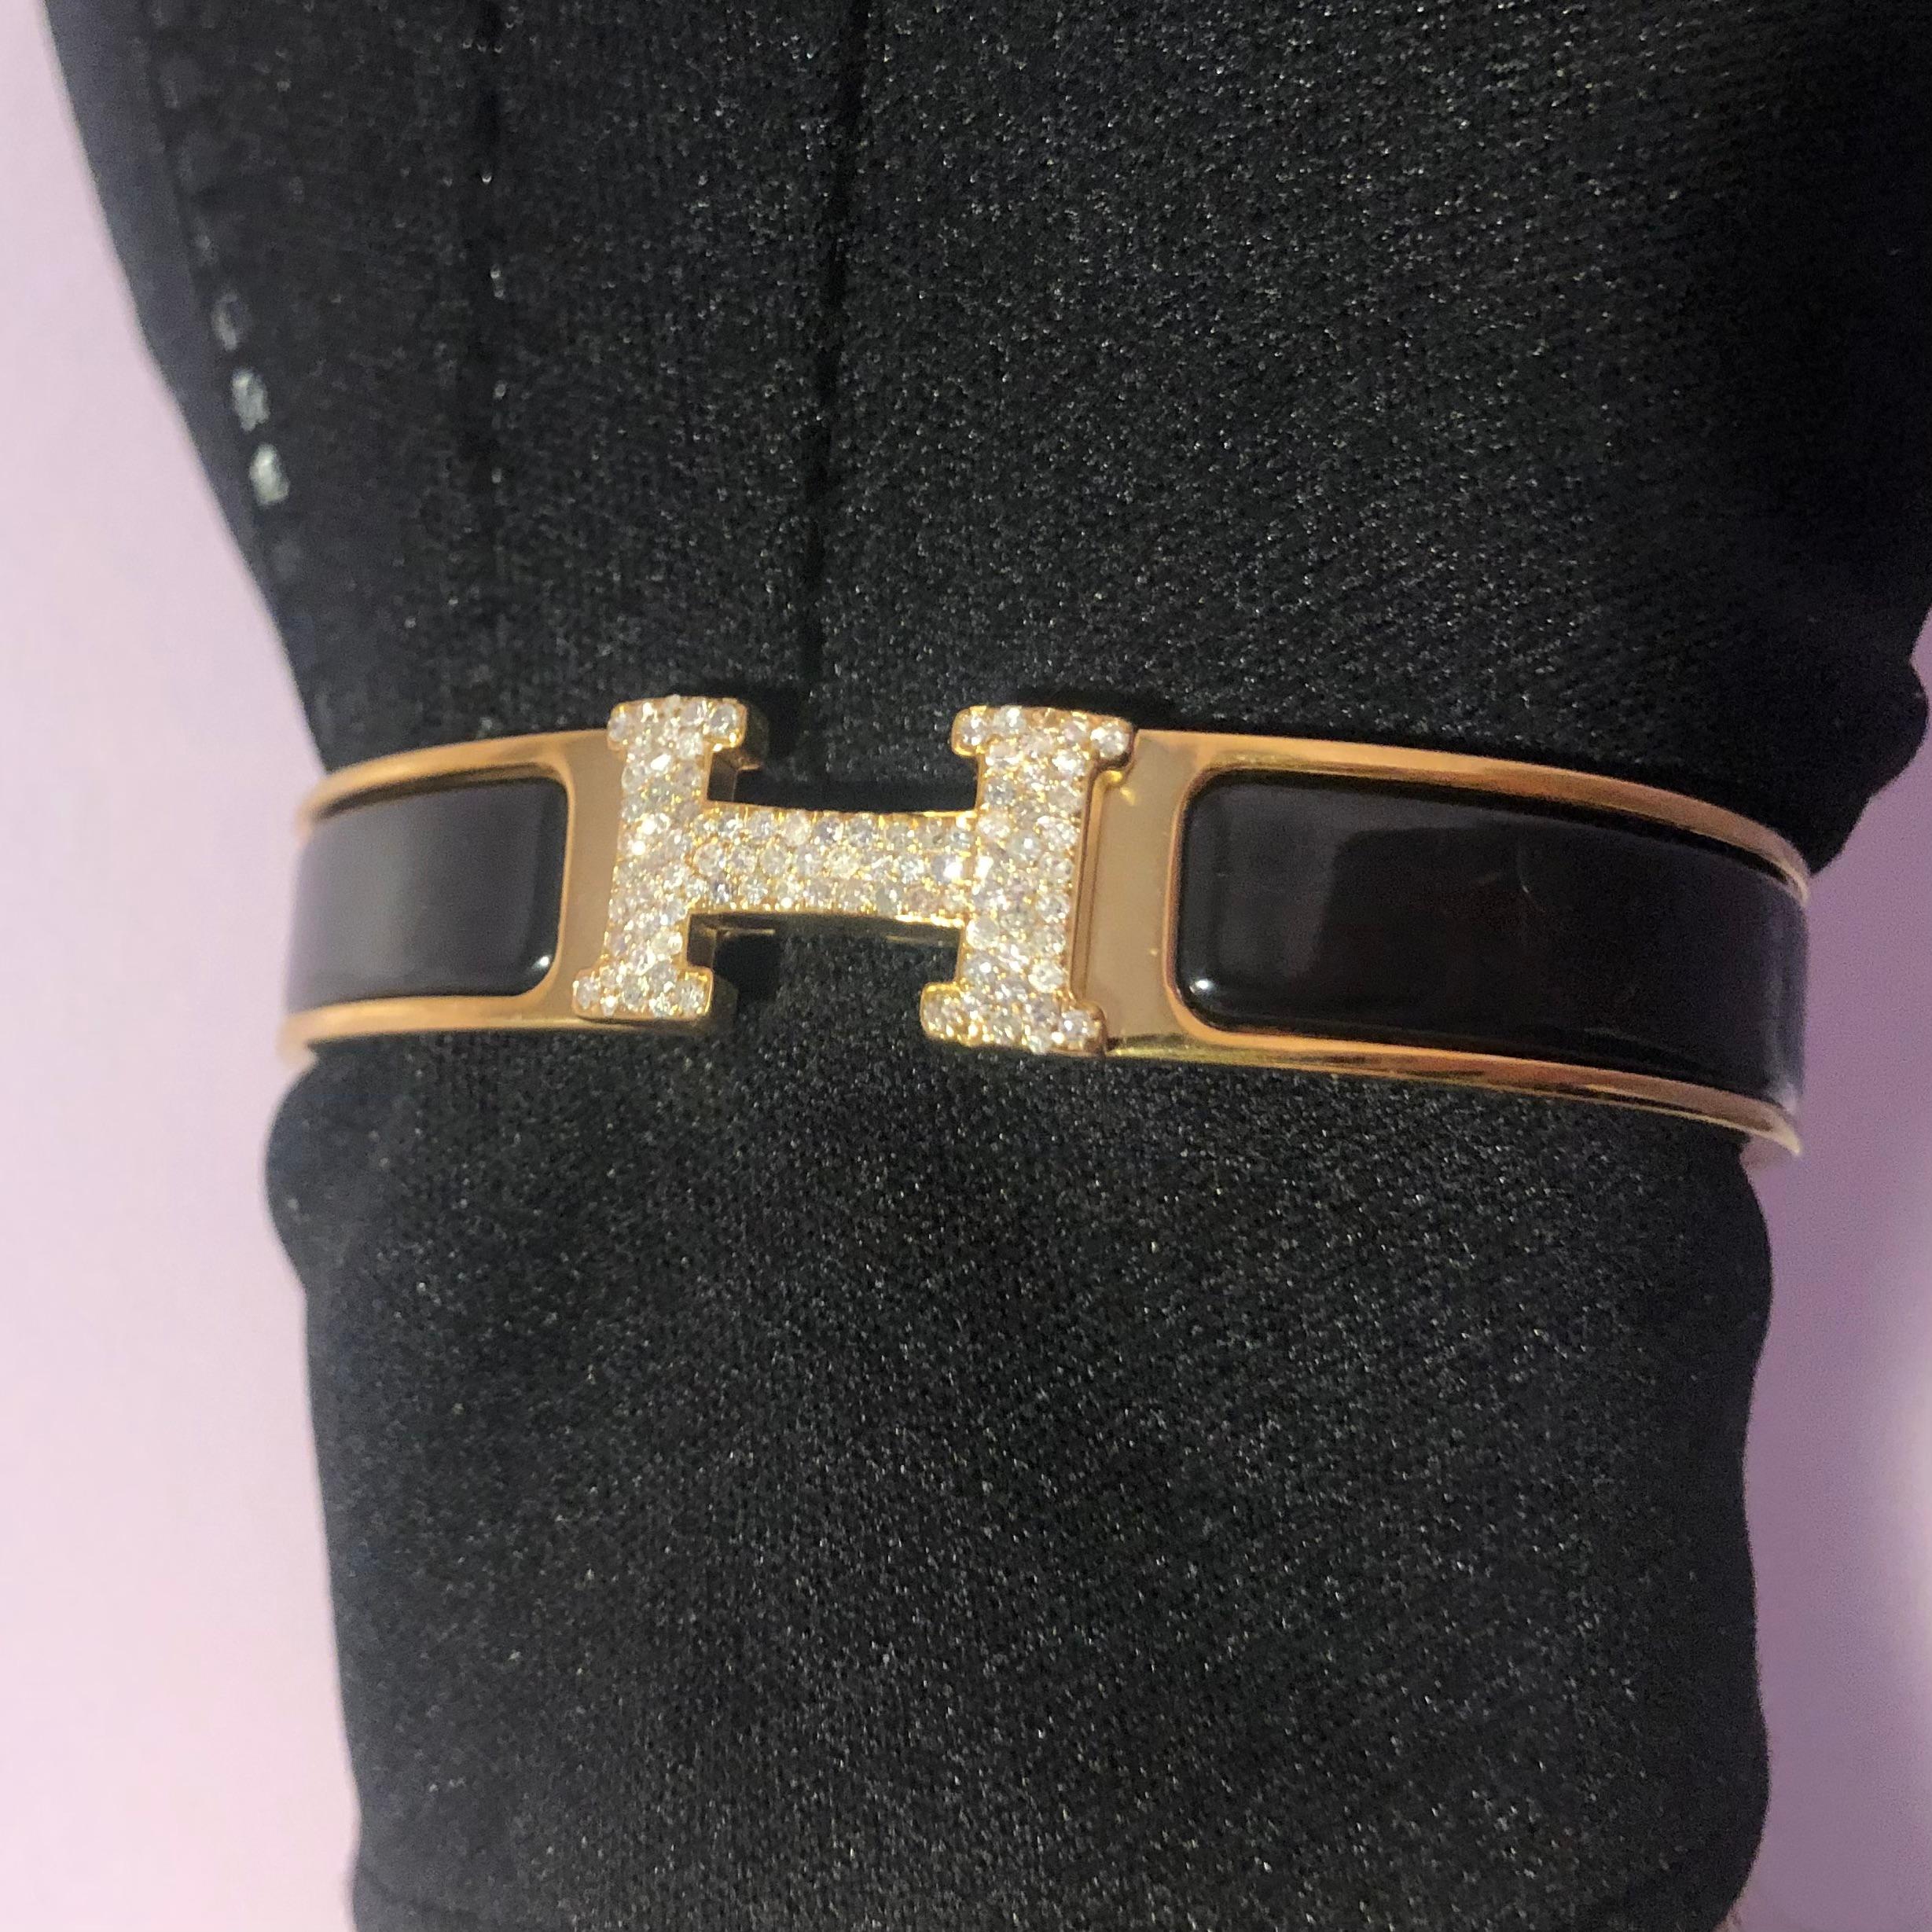 Custom Diamond Hermes Clic H Bracelet complete with original box and booklet papers. 

An original Hermes Clic H bracelet GM size in Black and Gold color is customized hand-set with approx. 1.00 carats of natural genuine earth-mined SI-I Diamonds.